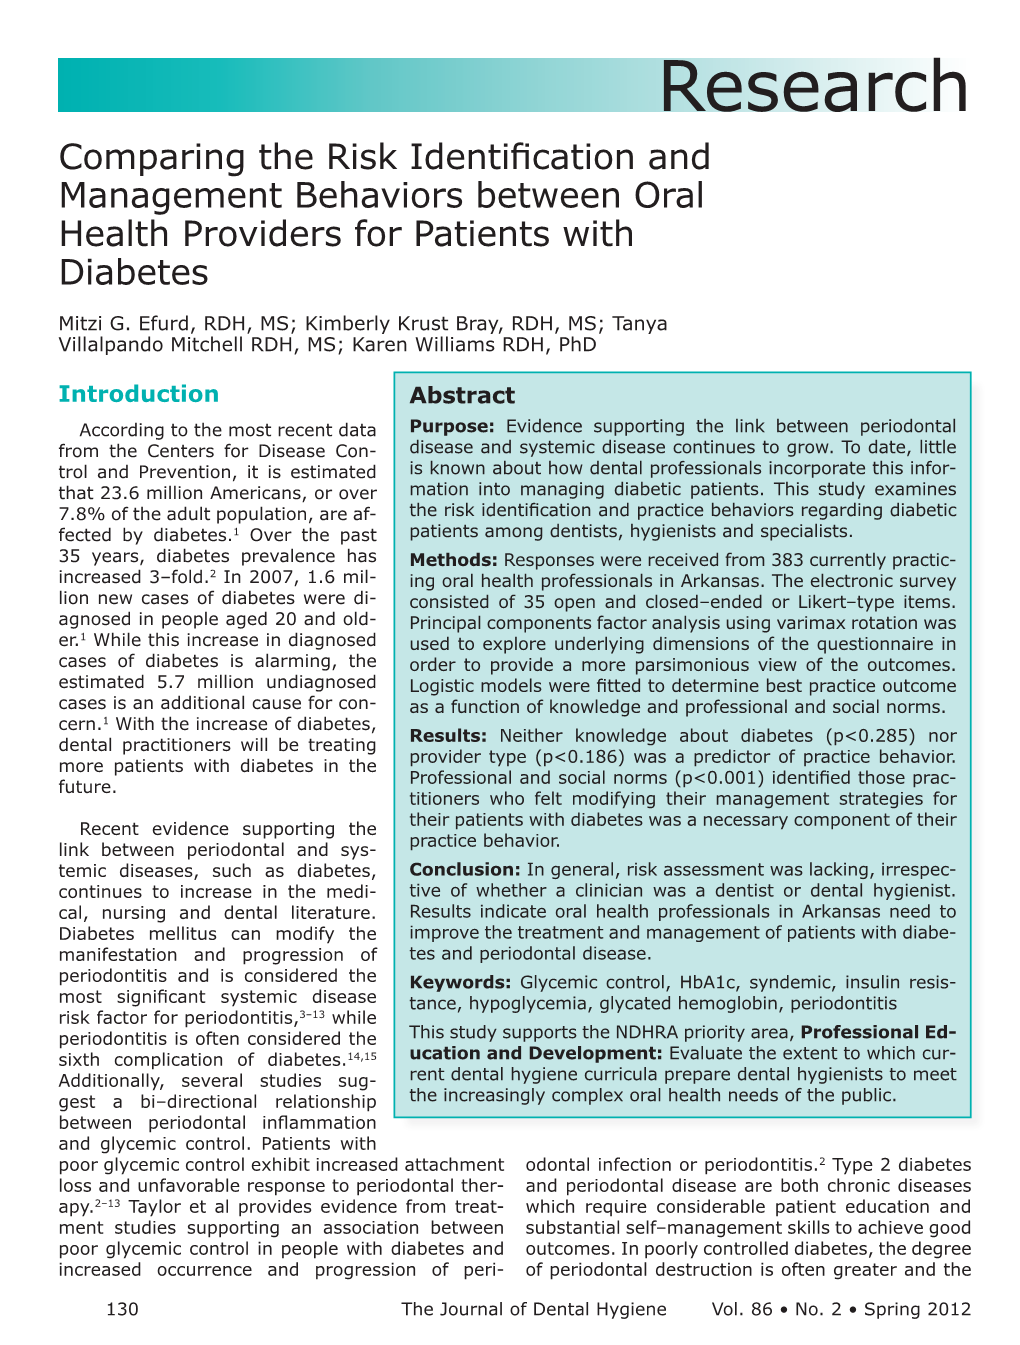 Research Comparing the Risk Identification and Management Behaviors Between Oral Health Providers for Patients with Diabetes